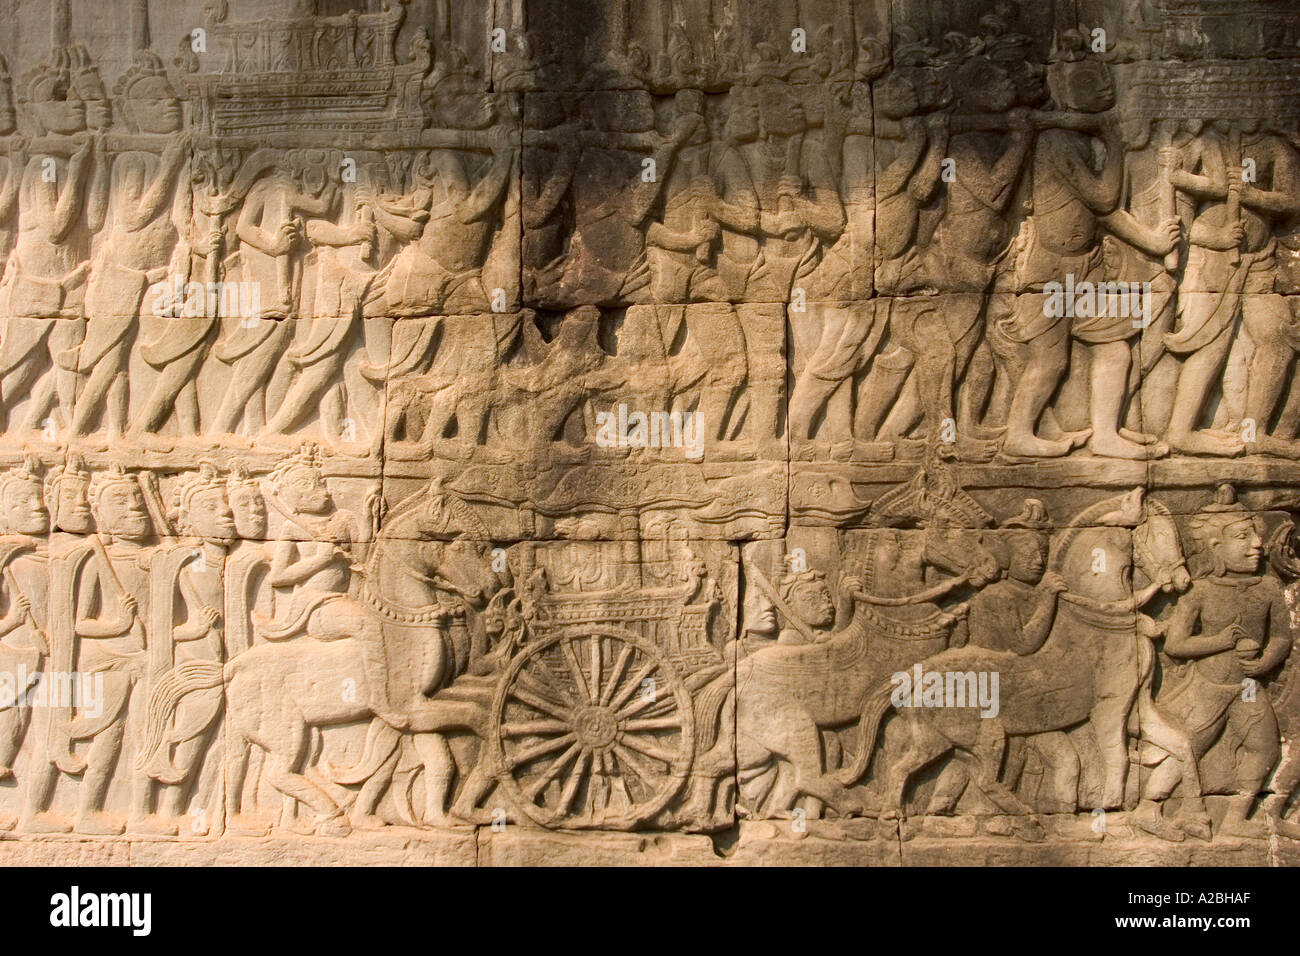 Cambodia Siem Reap Angkor Thom The Bayon bas relief panel showing 1177 Wars carriage pulled by horses Stock Photo